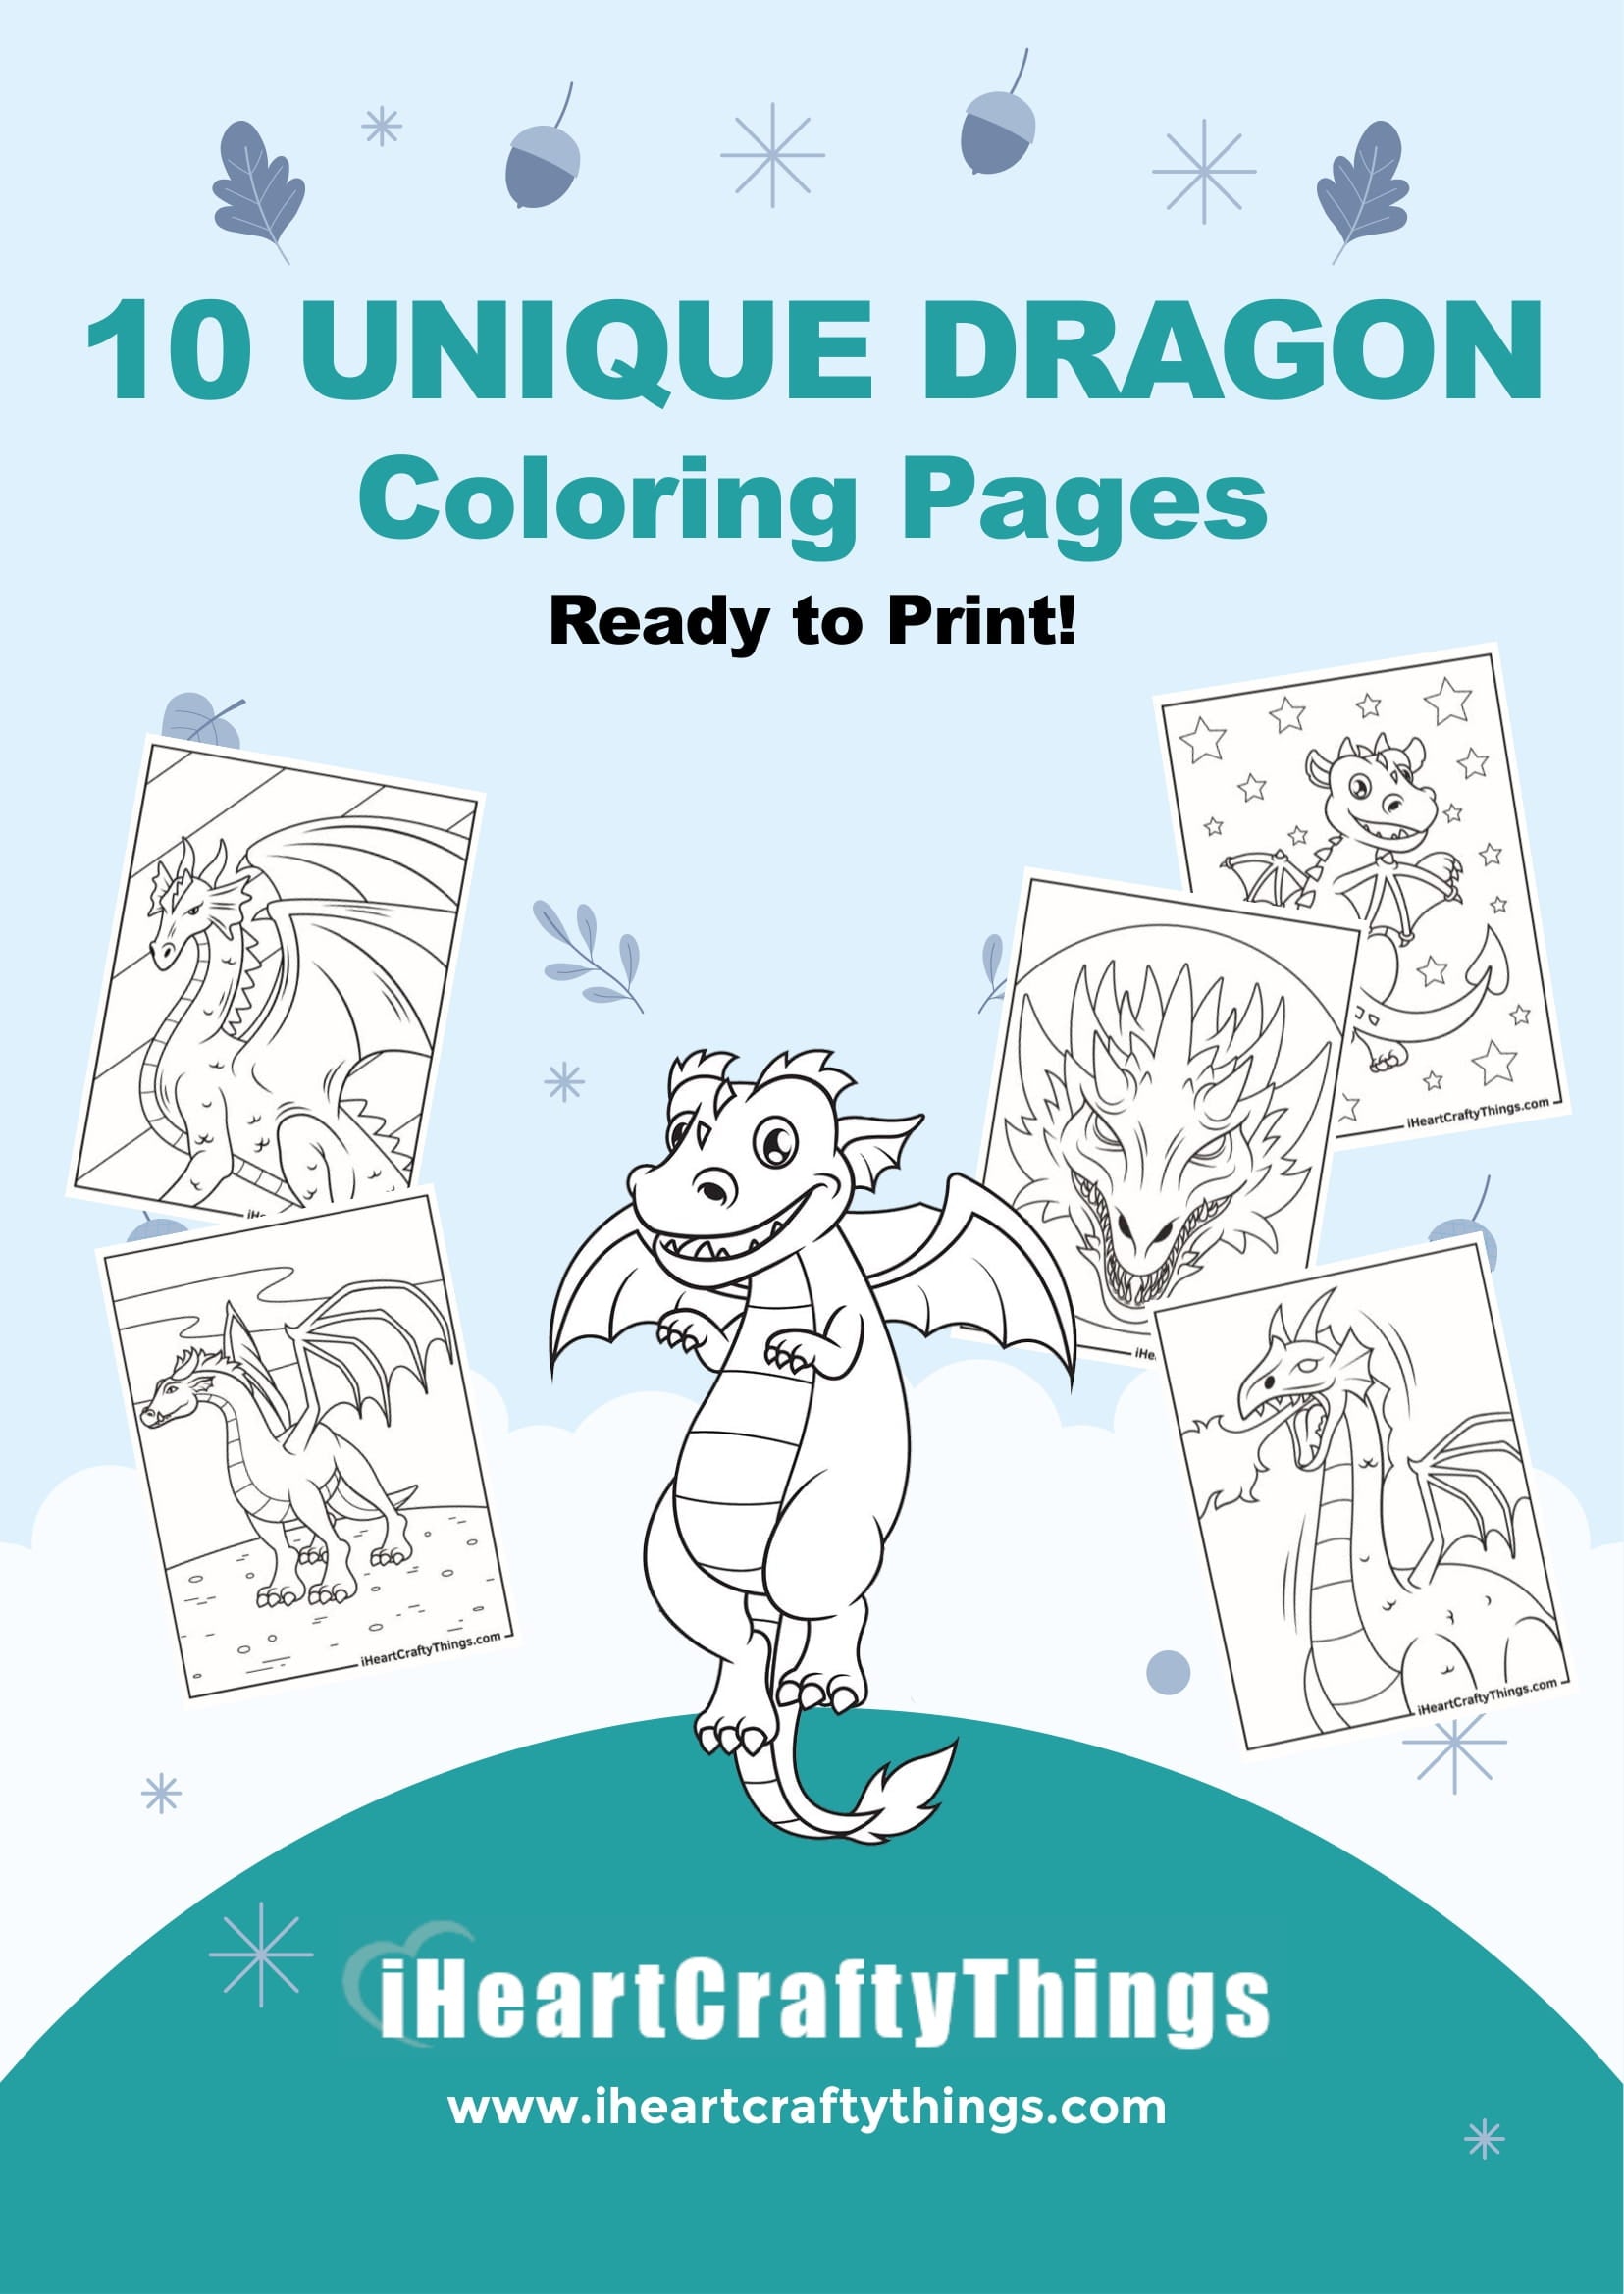 Dragon coloring pages â i heart crafty things